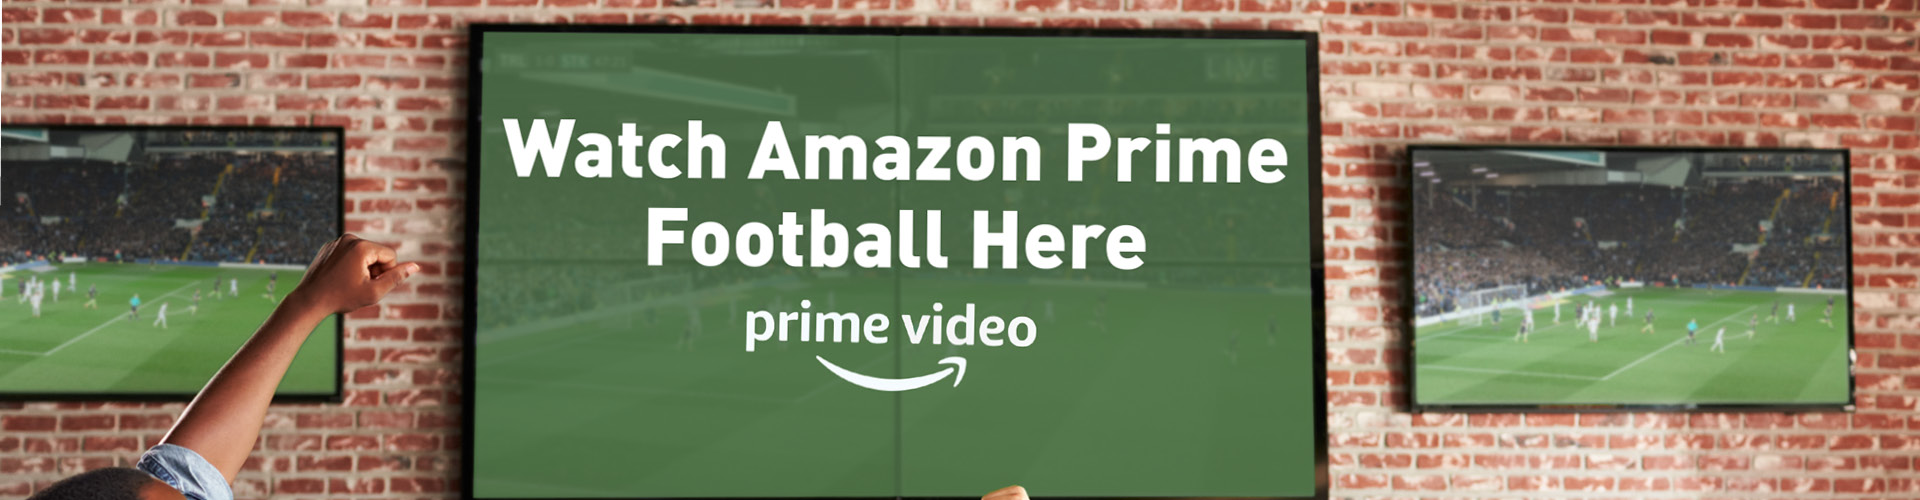 Watch Amazon Prime football at The Manchester in Blackpool